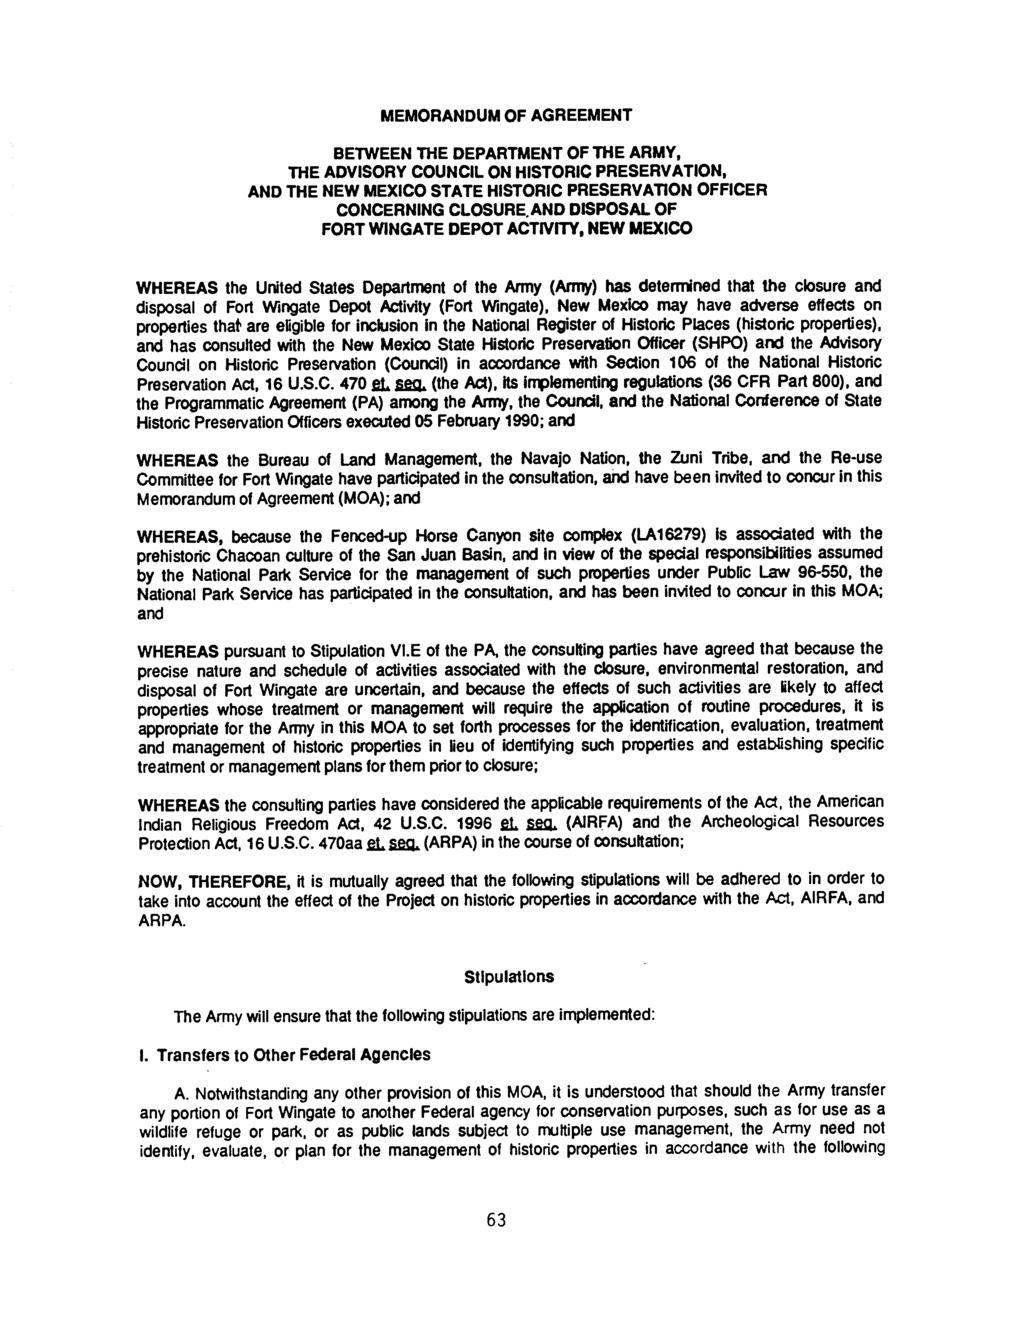 MEMORANDUM OF AGREEMENT BETWEEN THE DEPARTMENT OF THE ARMY, THE ADVISORY COUNCIL ON HISTORIC PRESERVATION, AND THE NEW MEXICO STATE HISTORIC PRESERVATION OFFICER CONCERNING CLOSURE, AND DISPOSAL OF